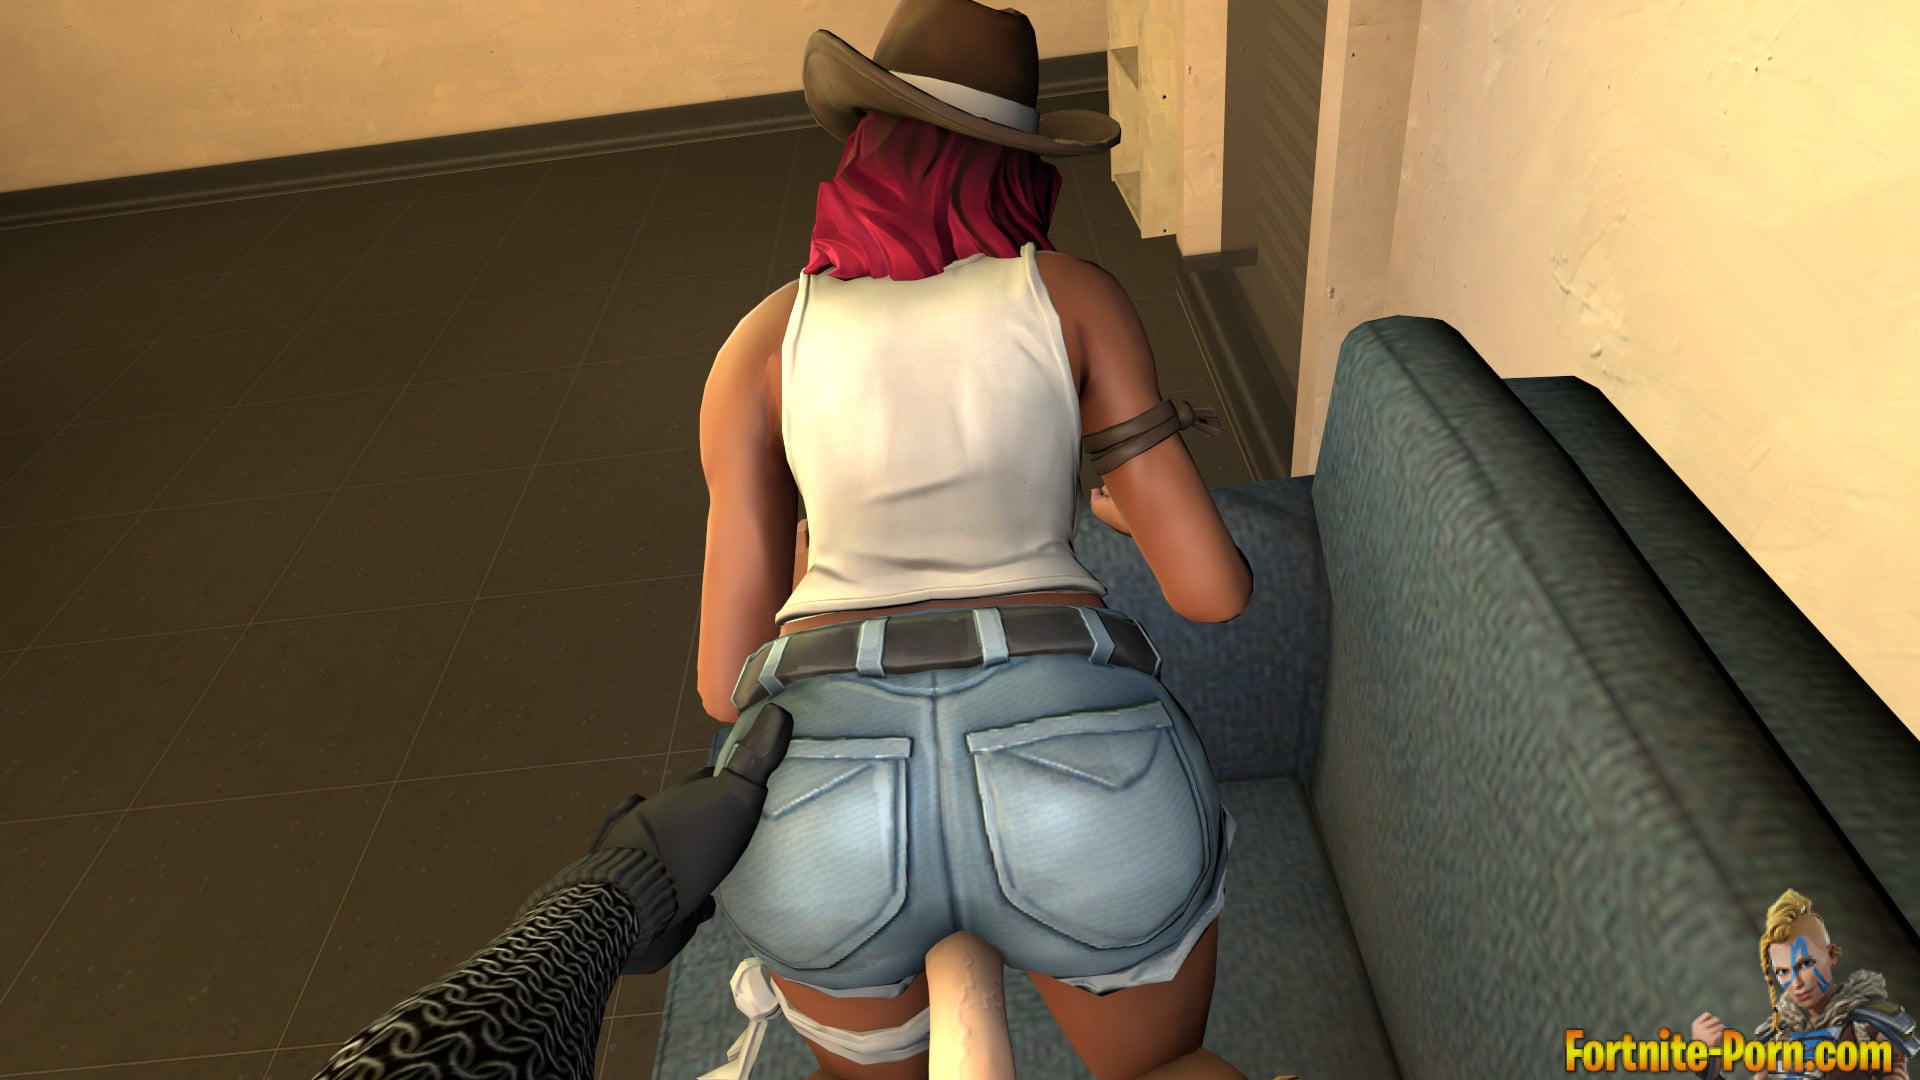 Calamity getting fucked in the ass (Doggystyle) * Fortnite Porn.